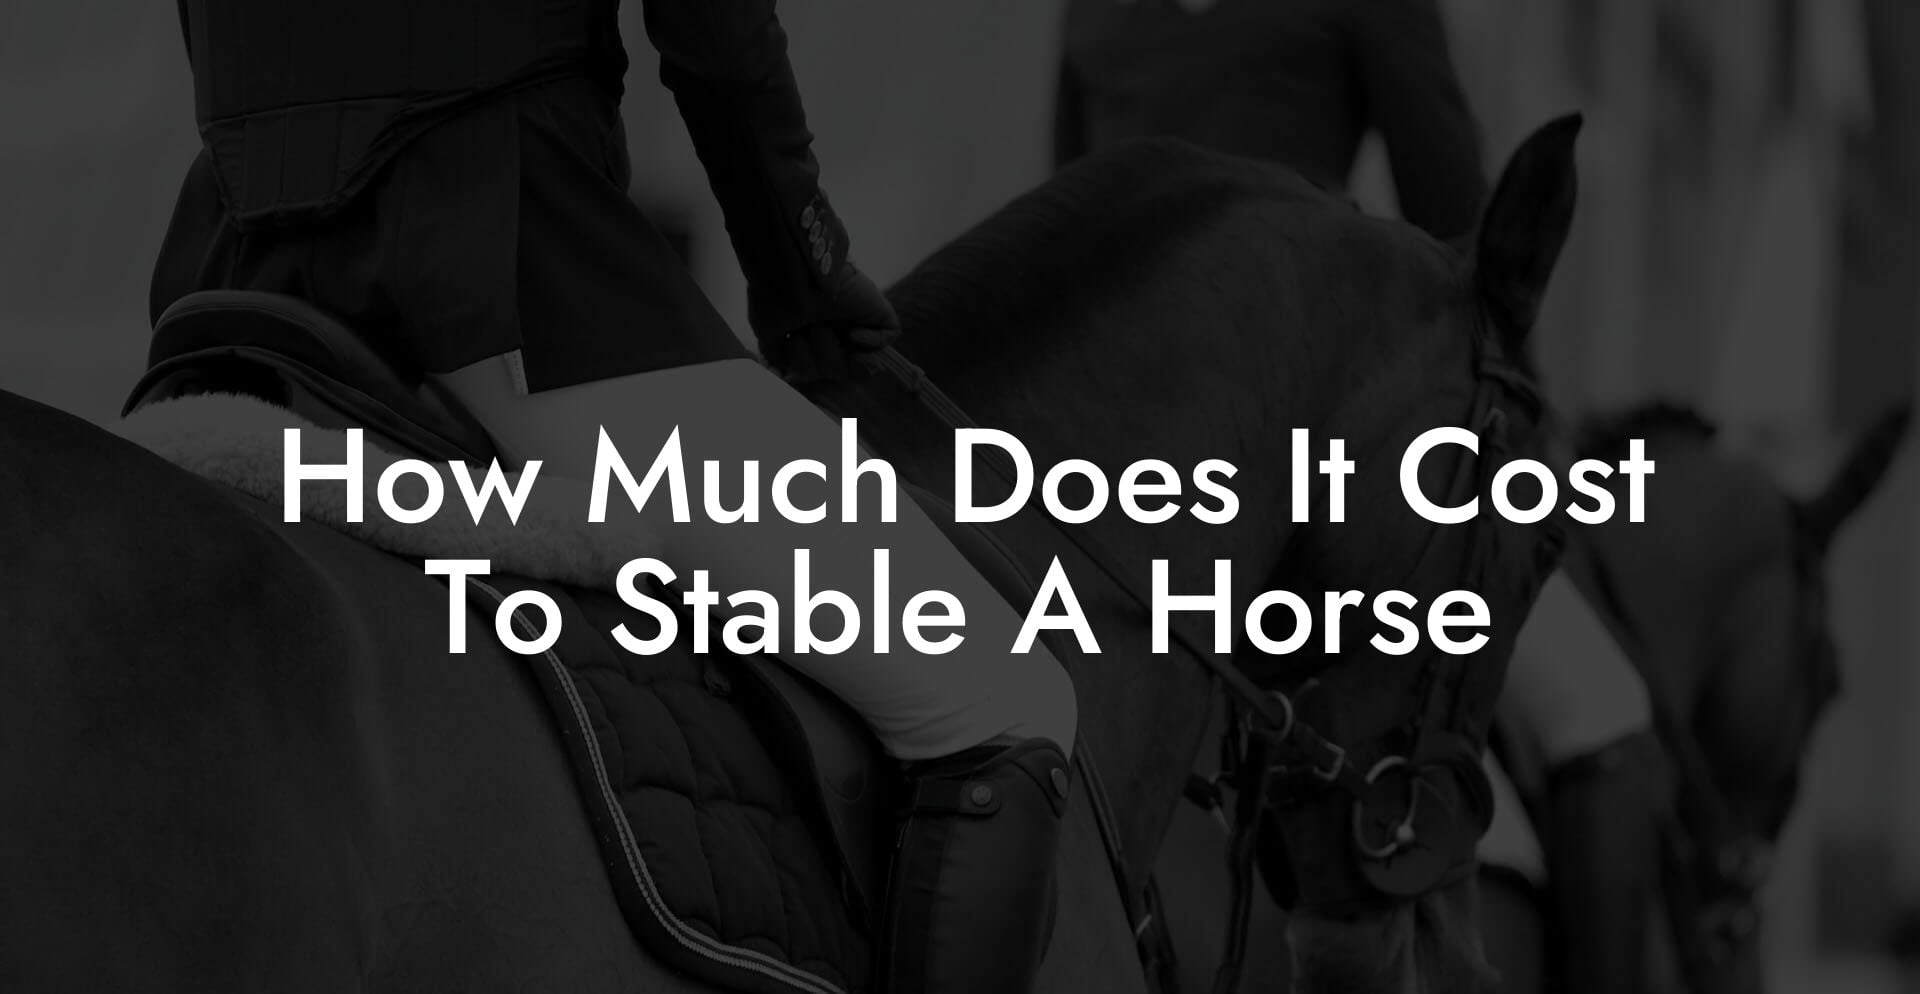 How Much Does It Cost To Stable A Horse